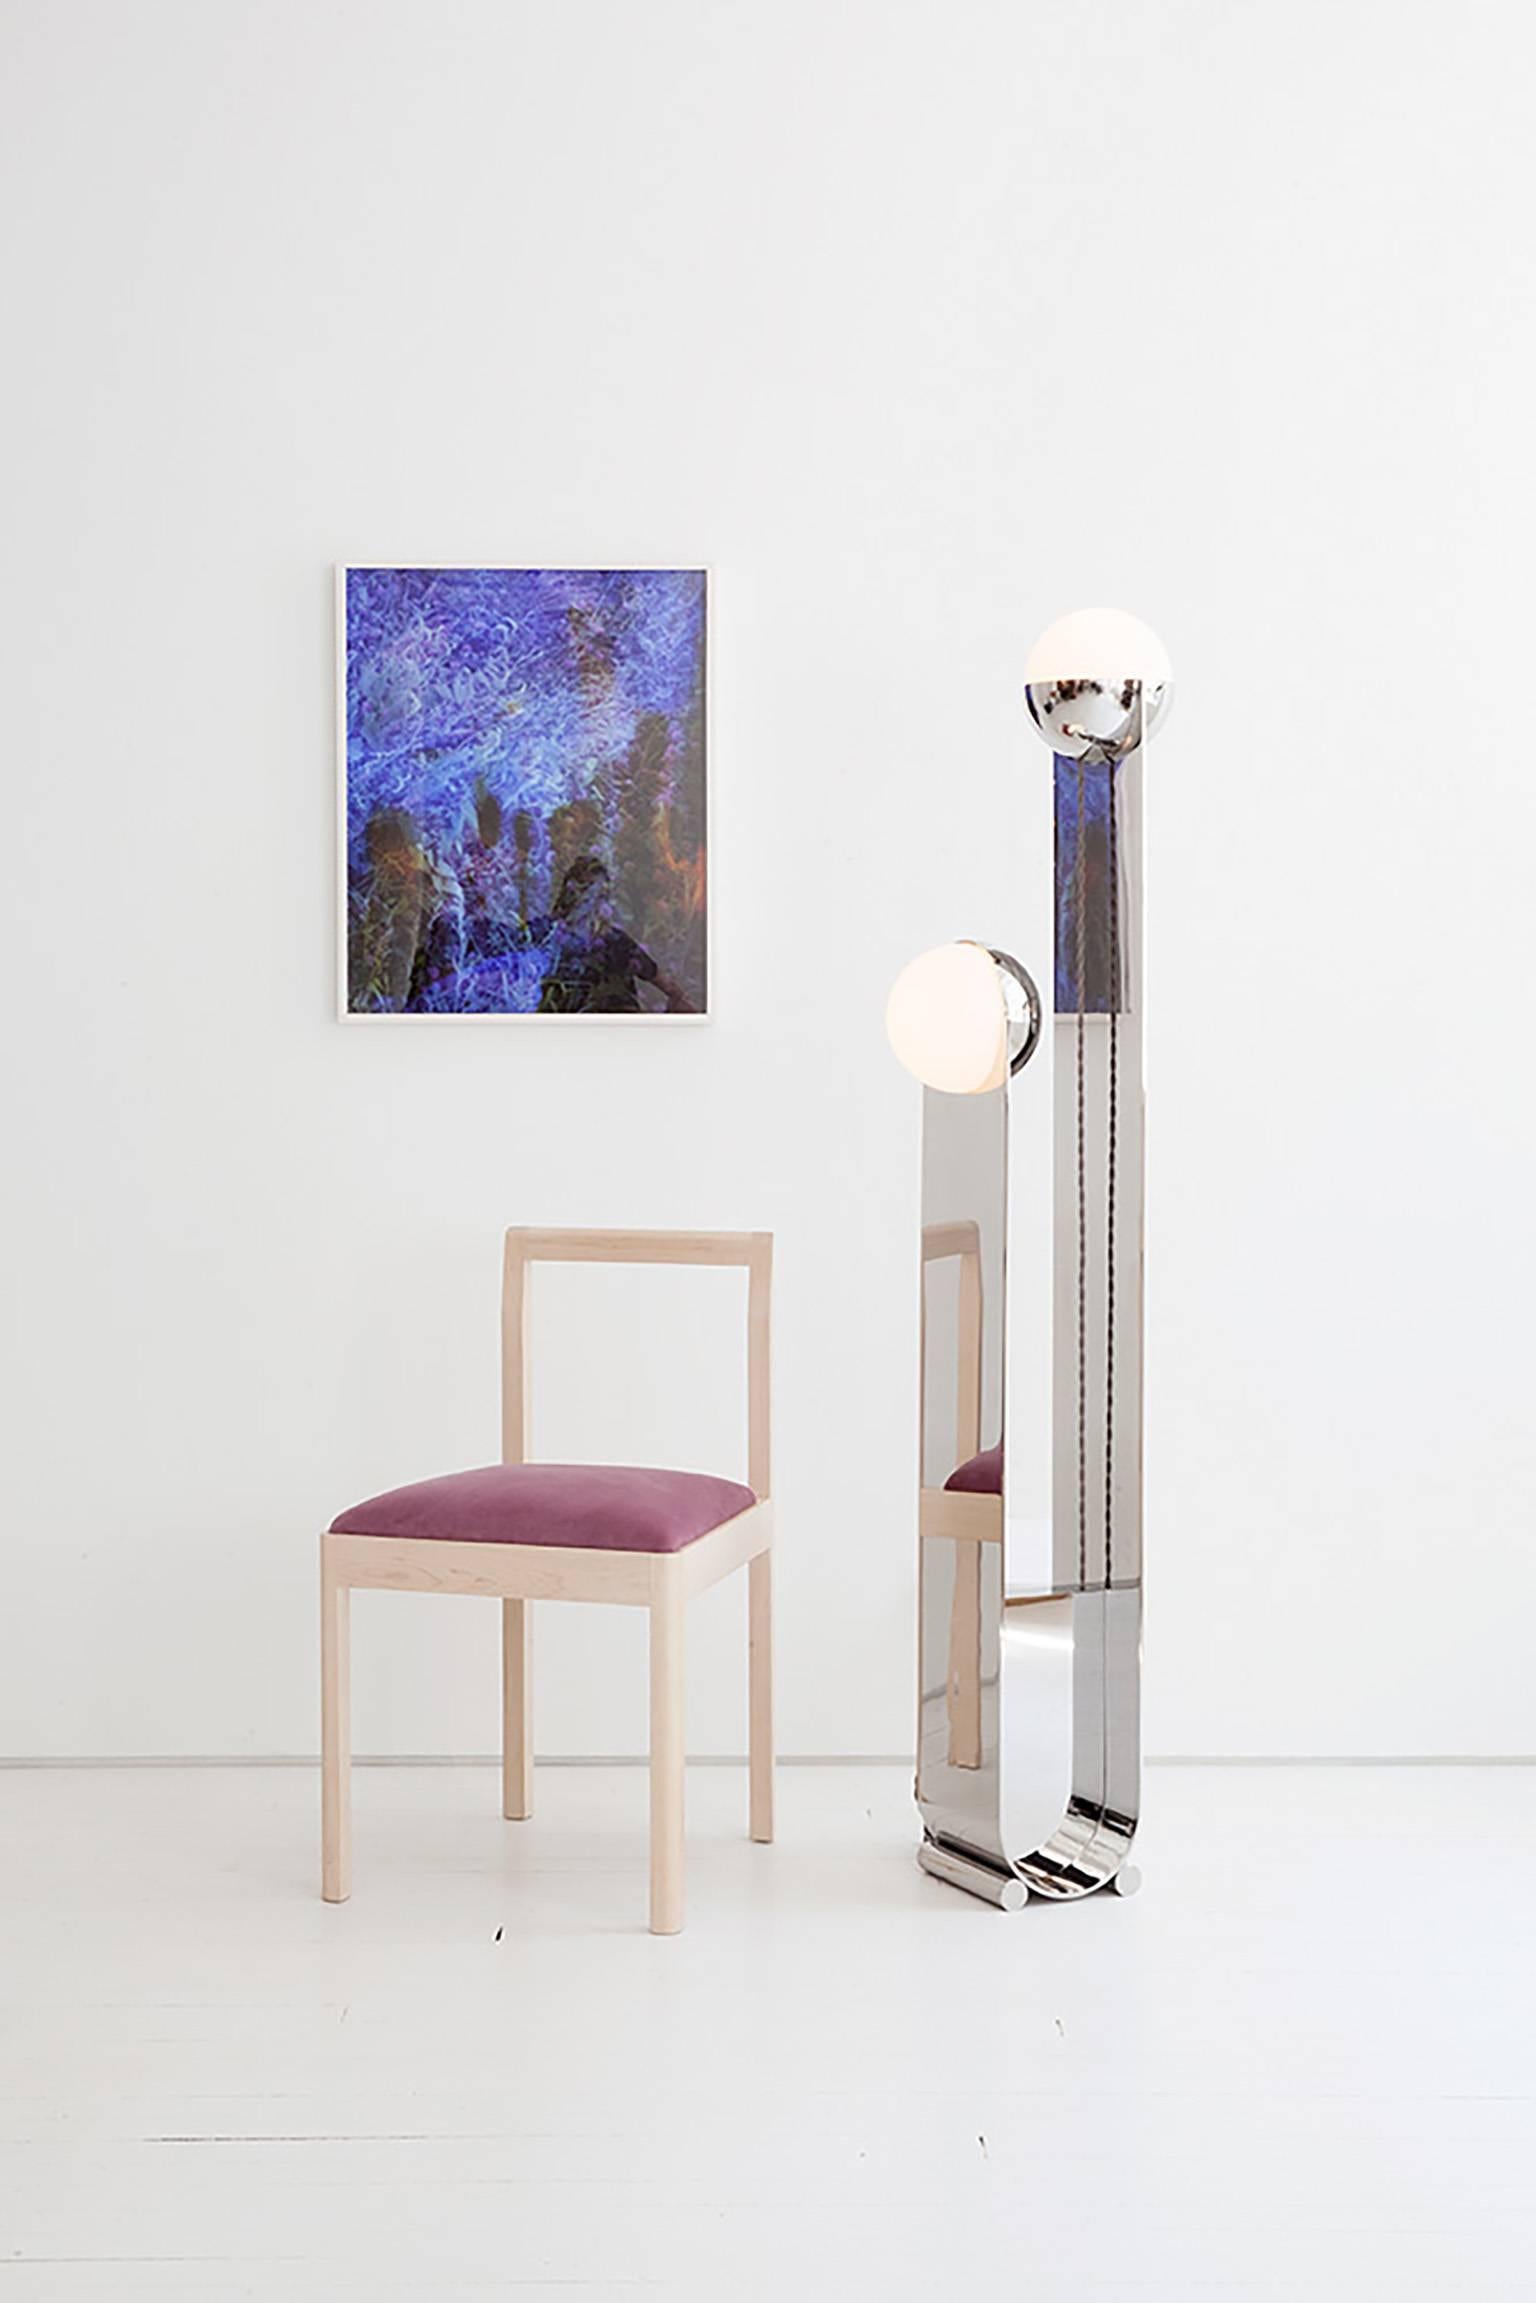 The Pete & Nora Floor Lamp is crafted in collaboration with our team of highly skilled local fabricators, and is available in polished stainless steel and handblown glass. The glass globes unscrew to allow access to the sockets, which are